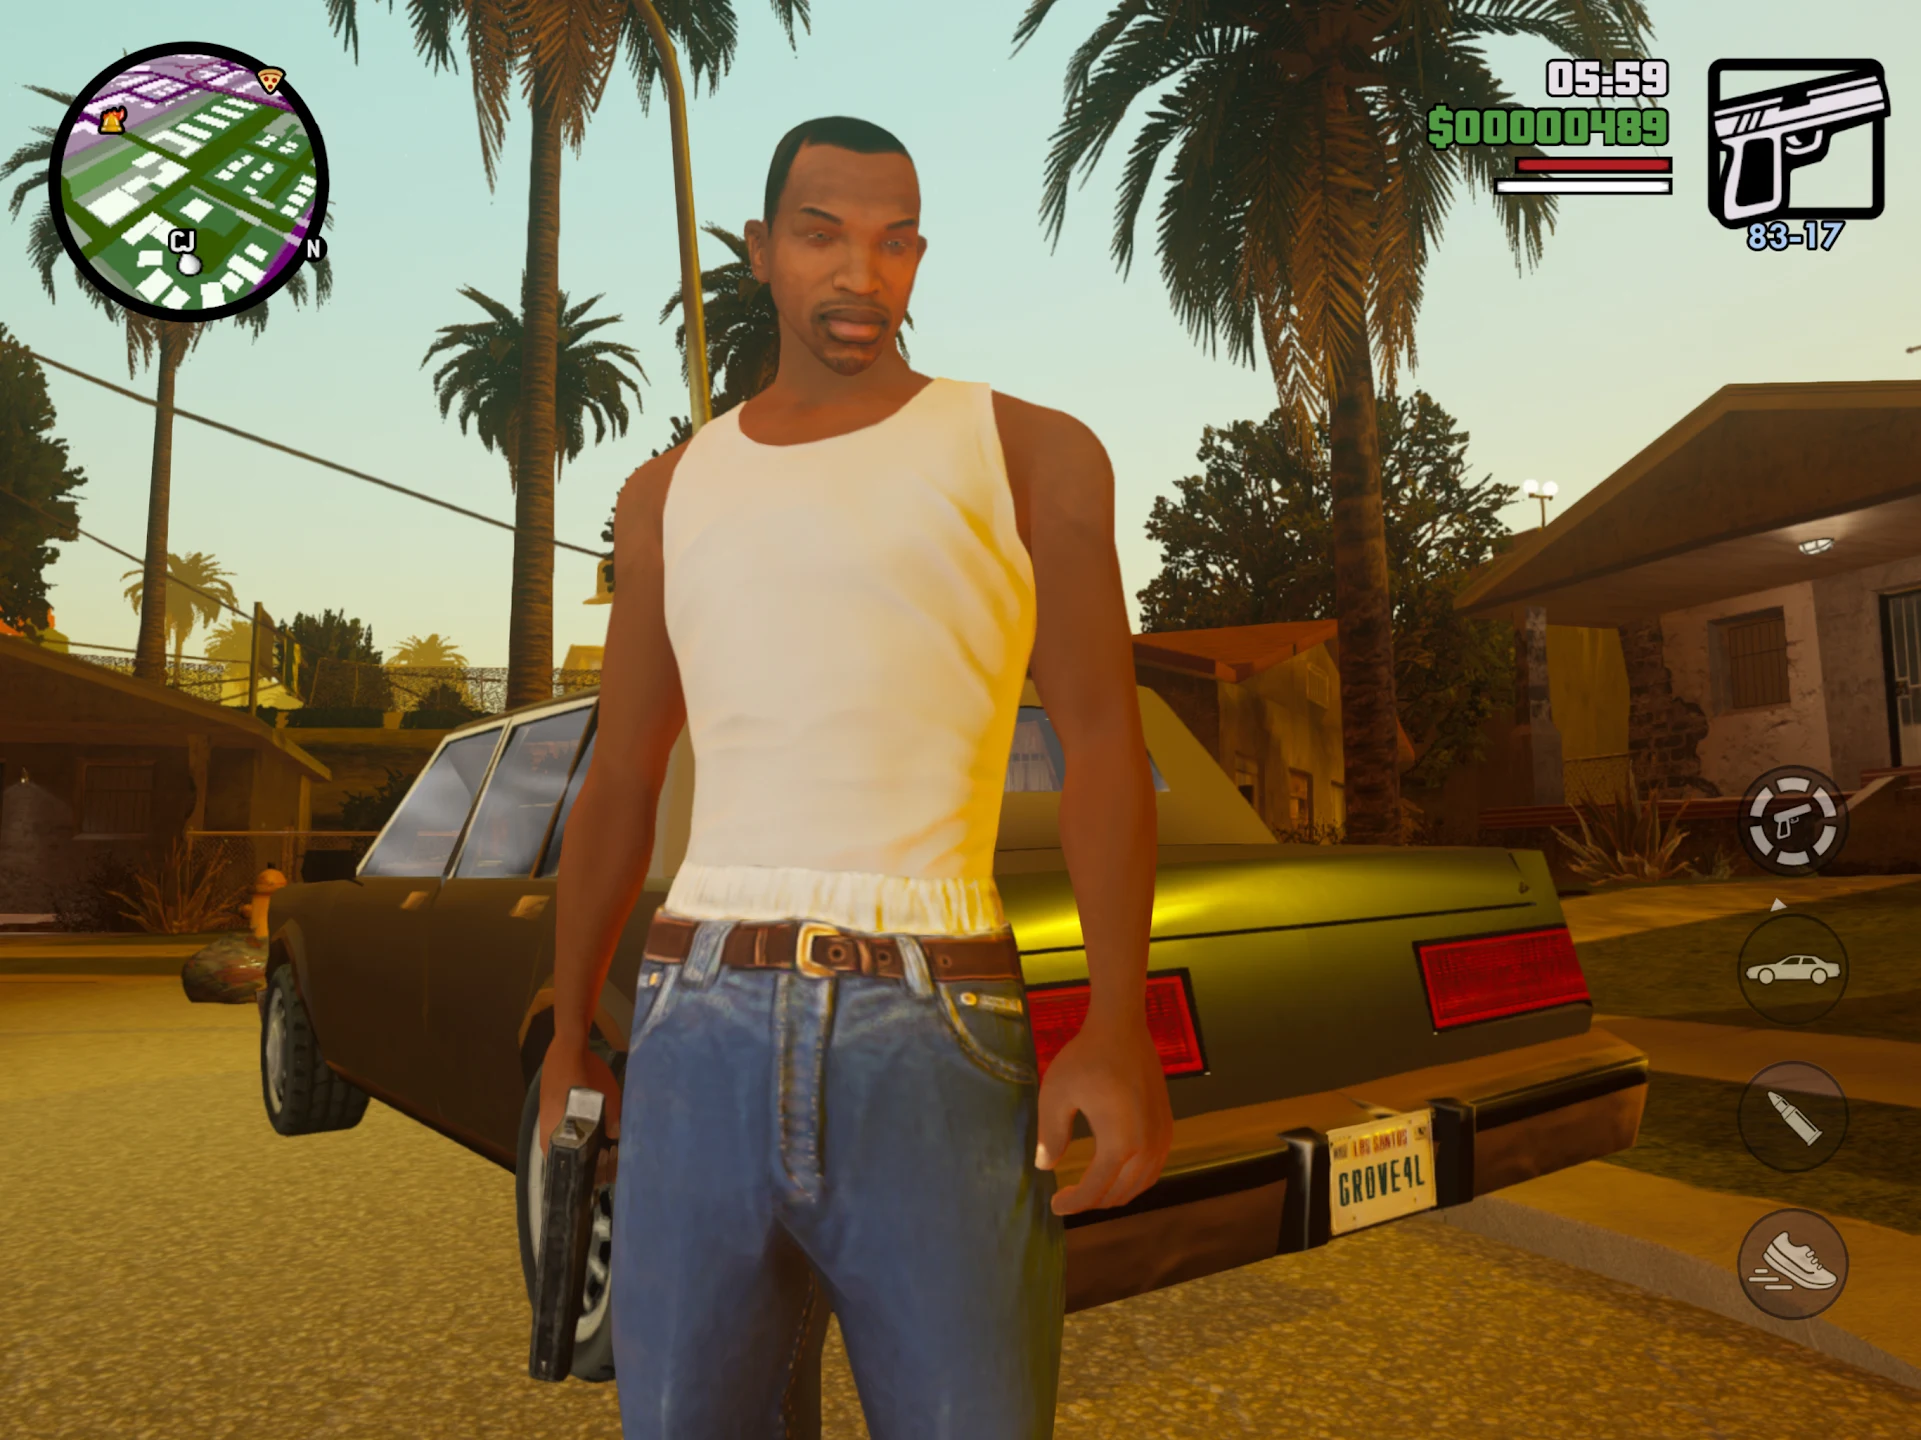 Remasters of the GTA Trilogy (GTA III, San Andreas, and Vice City